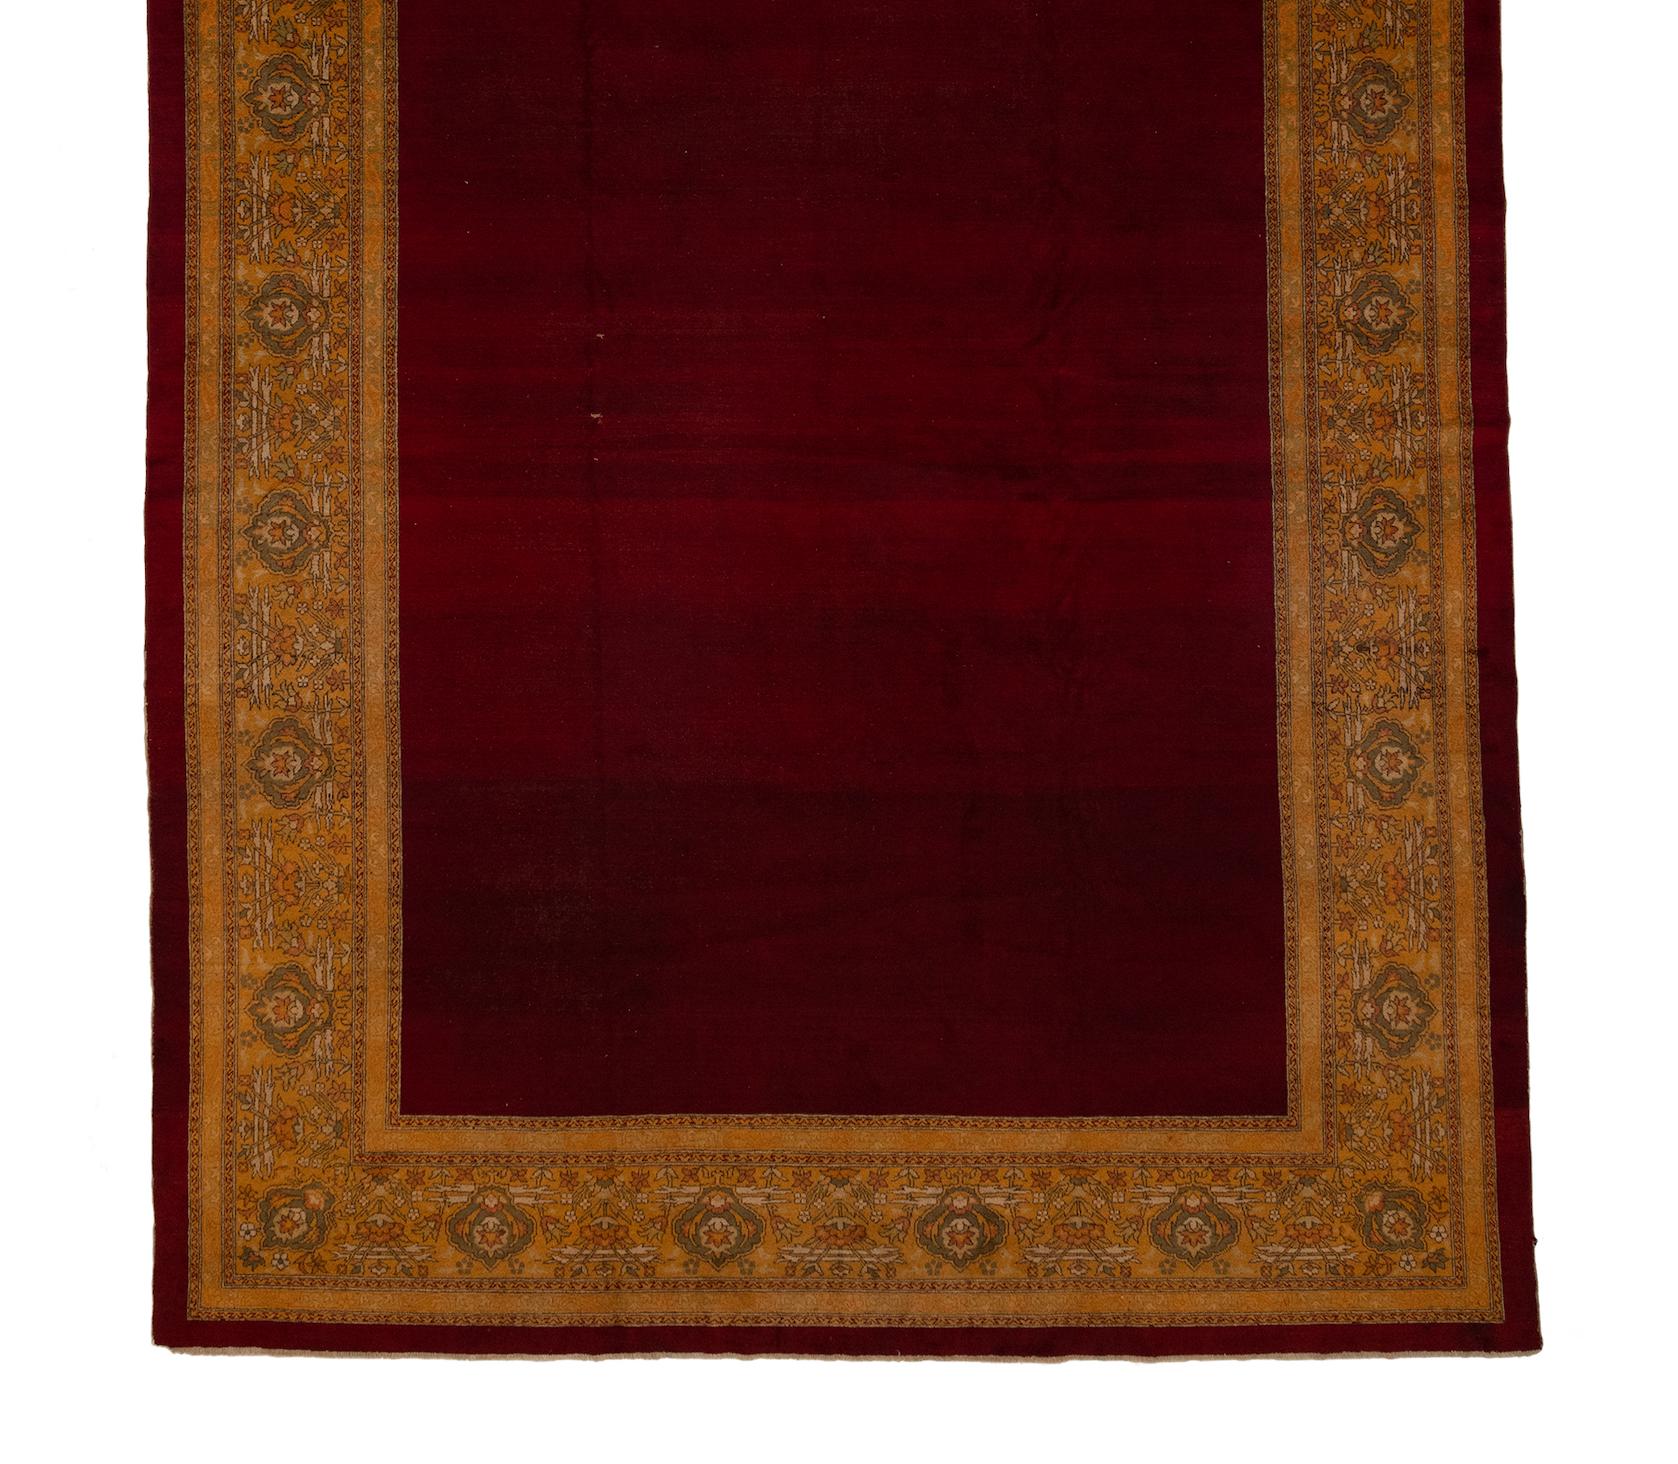 This is an antique Indian Agra rug, circa 1880s. This rug is defined by its exquisite use of color. It has a beautiful open sapphire red field and saffron yellow border inset with floral designs of olive greens, browns and reds.